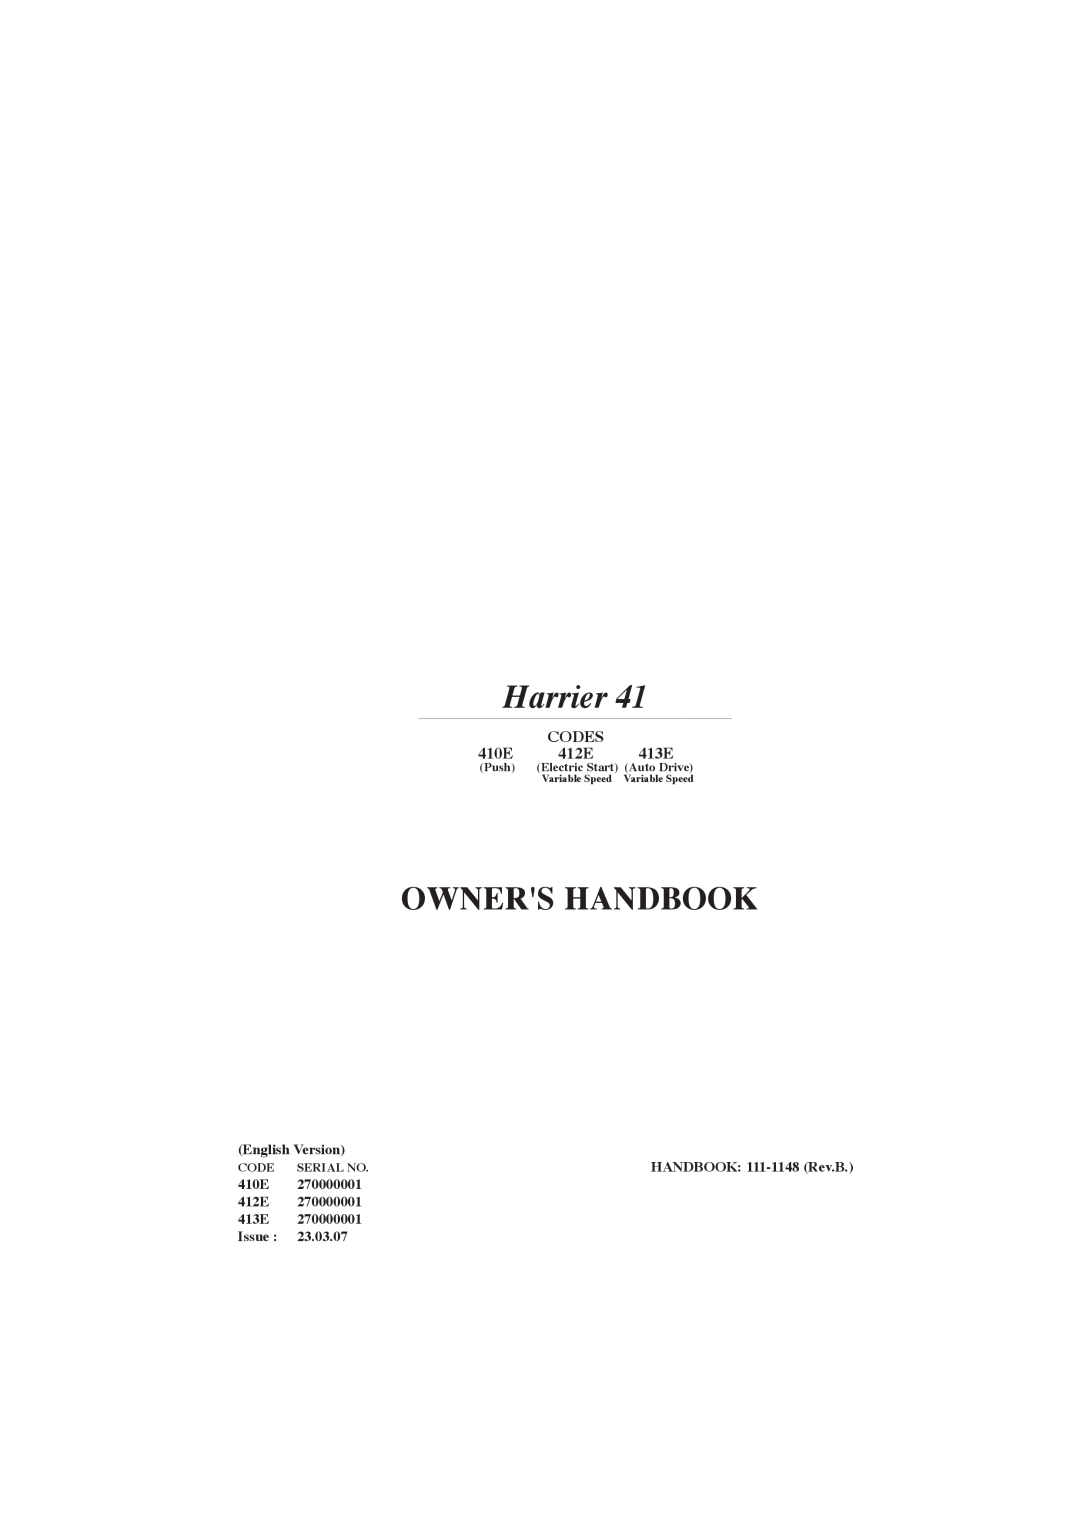 Hayter Mowers 413E manual 410E, 412E, Codes, English Version, 270000001, Issue, 23.03.07, Harrier, Owners Handbook 